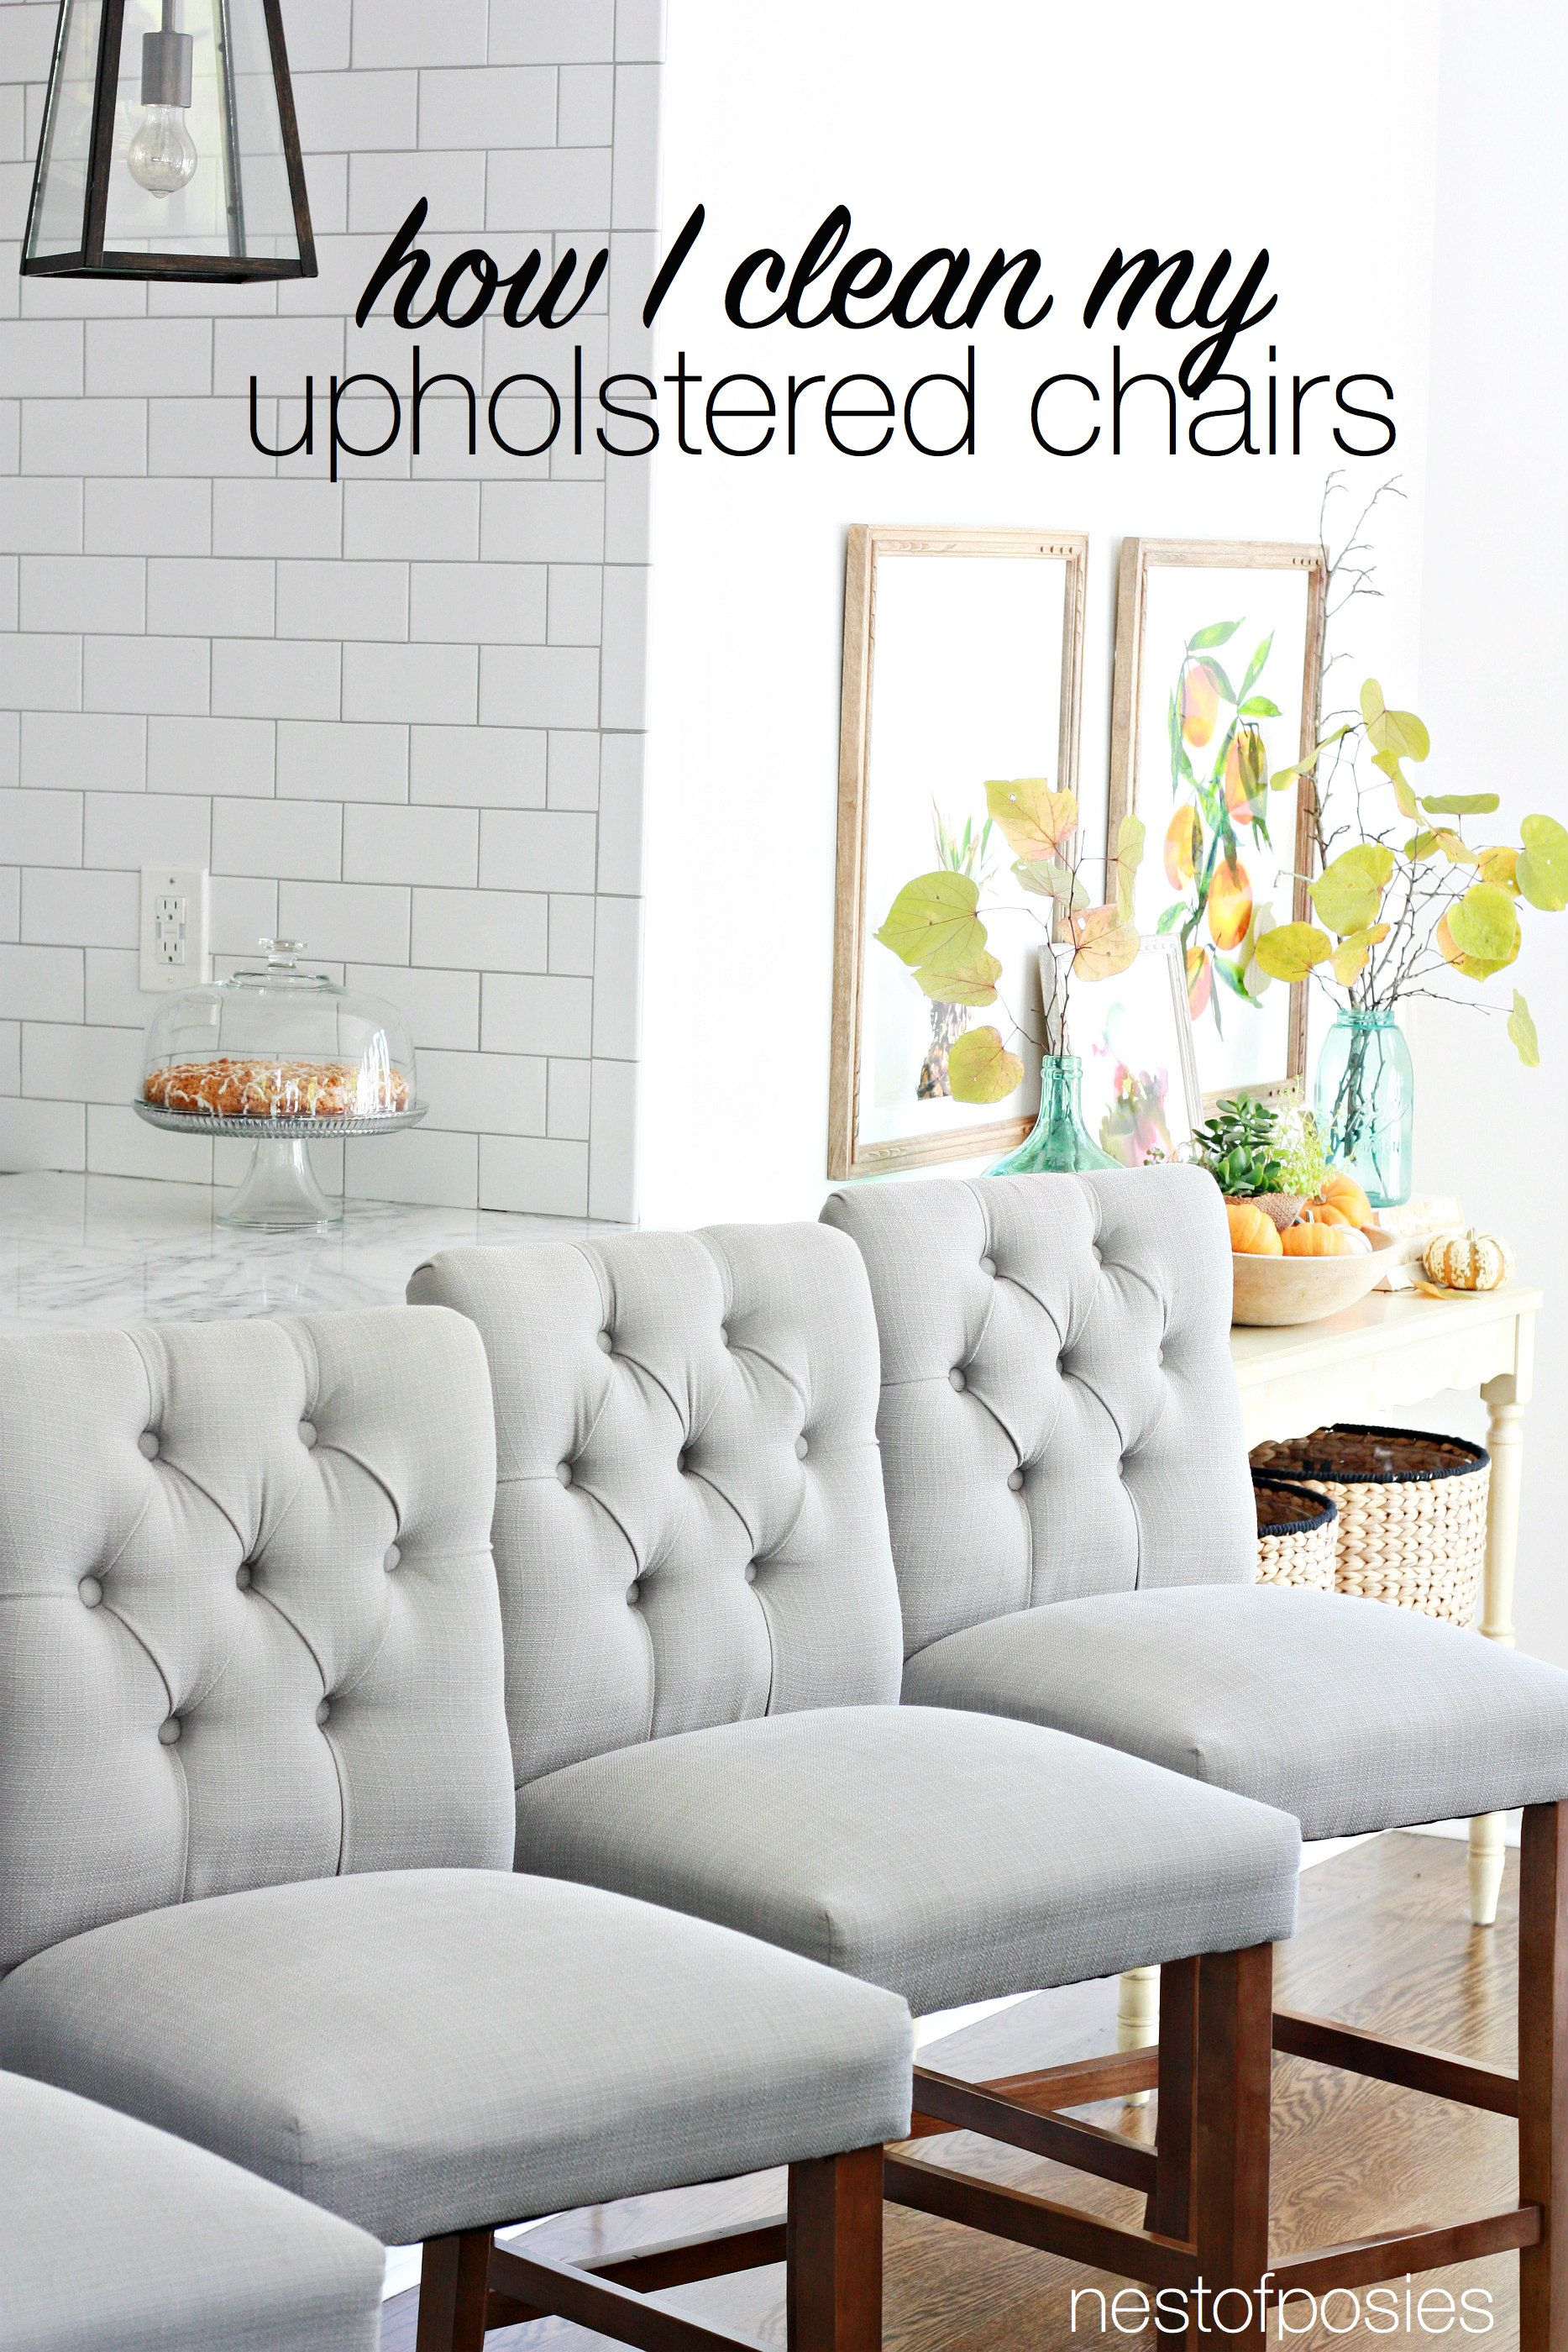 How To Clean Upholstered Chairs | Upholstered Chairs in How To Clean Upholstered Furniture